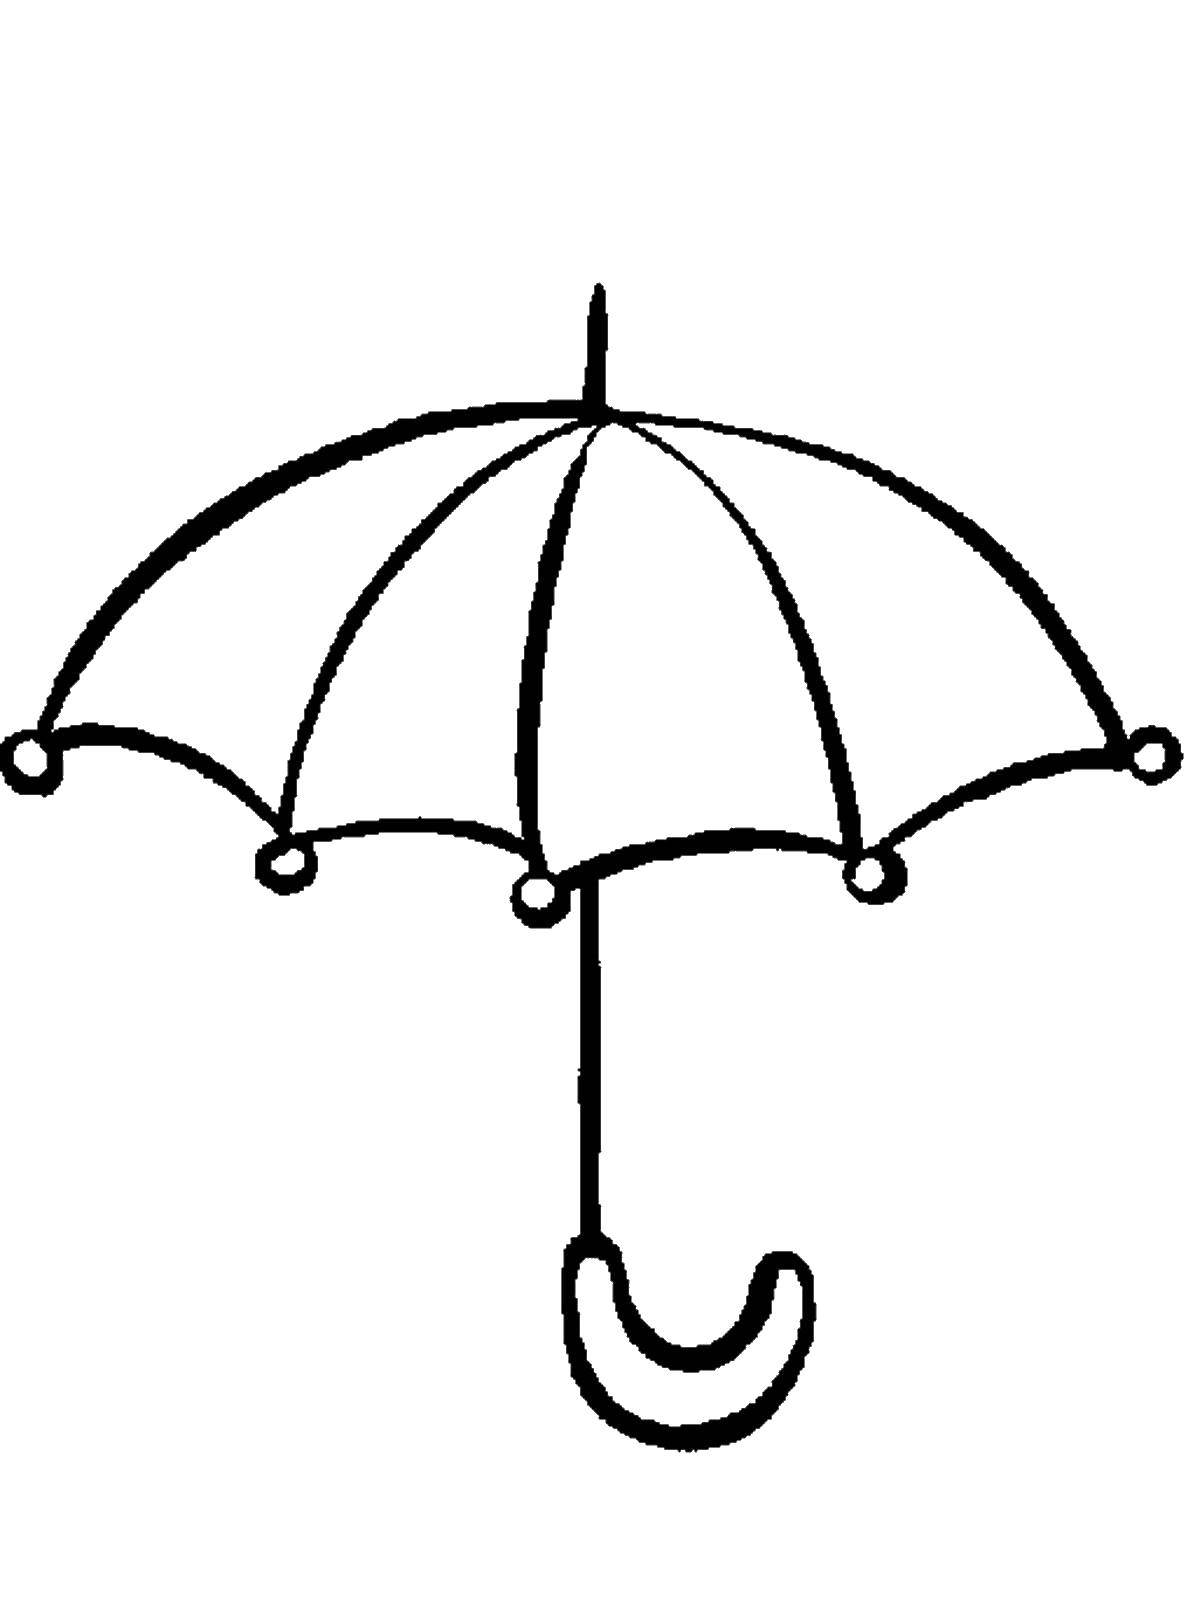 Coloring Umbrella. Category Coloring pages for kids. Tags:  Umbrella, rain.